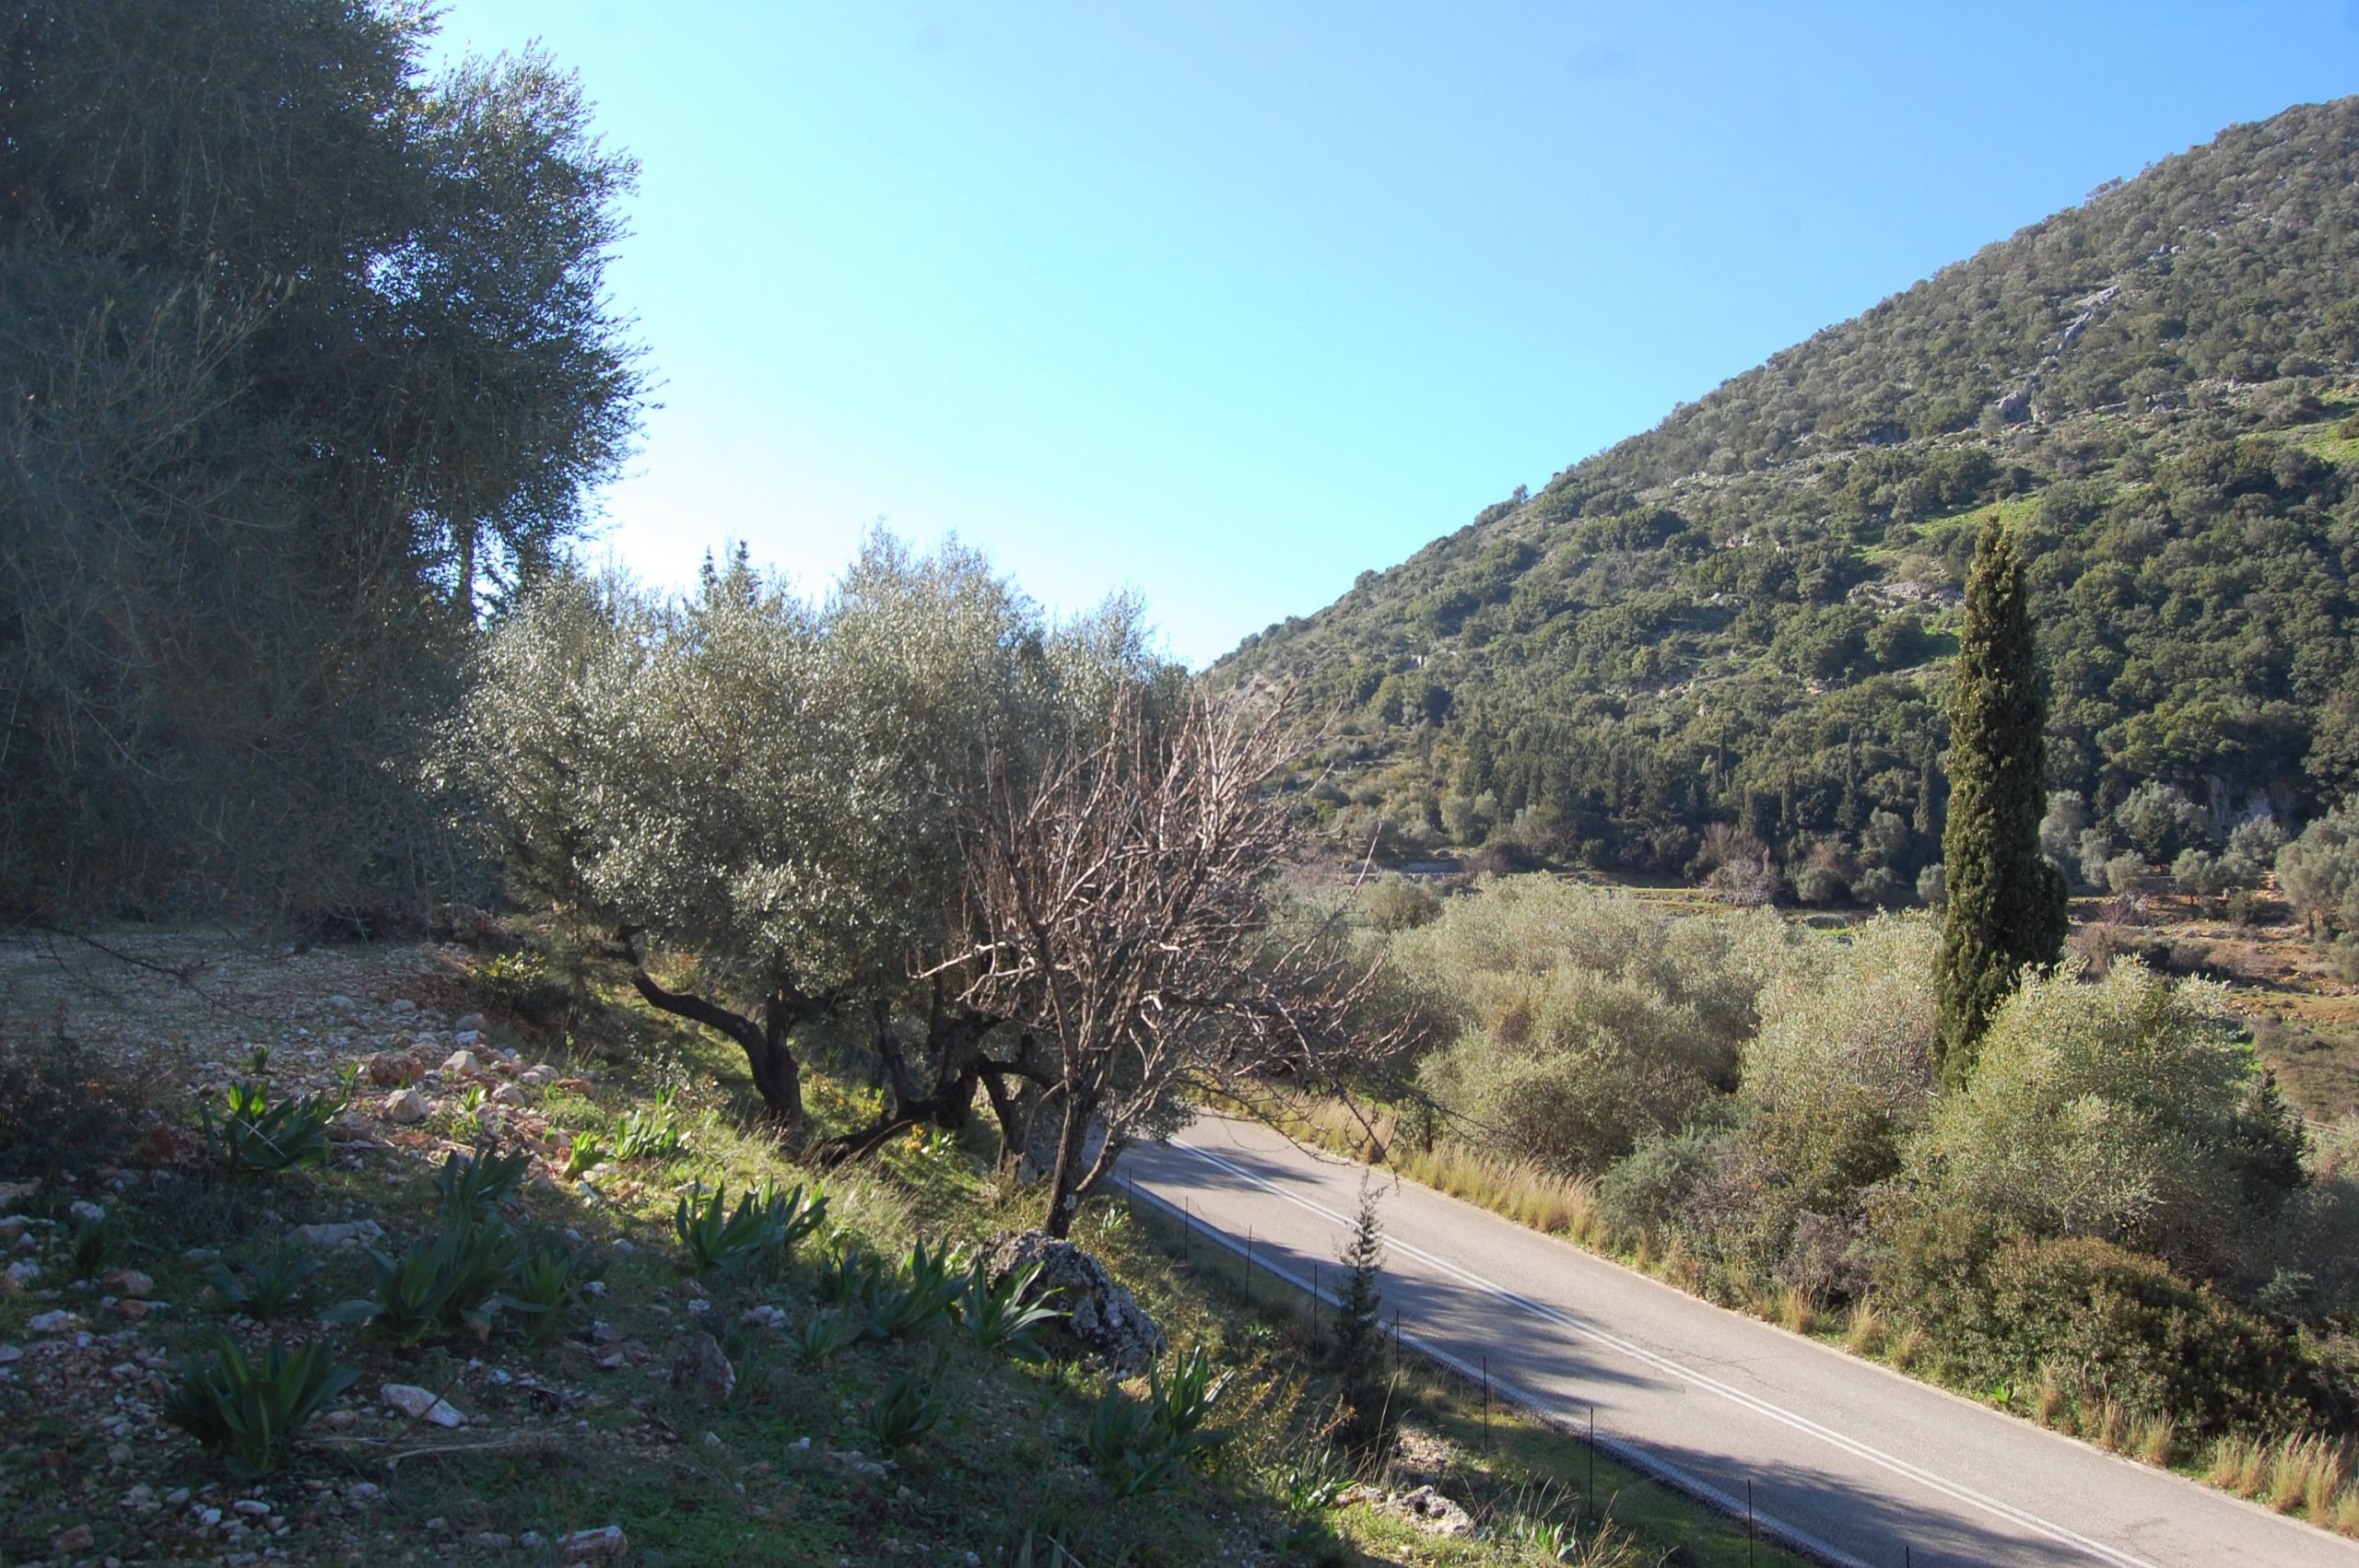 Road to land for sale on Ithaca Greece, Piso Aetos